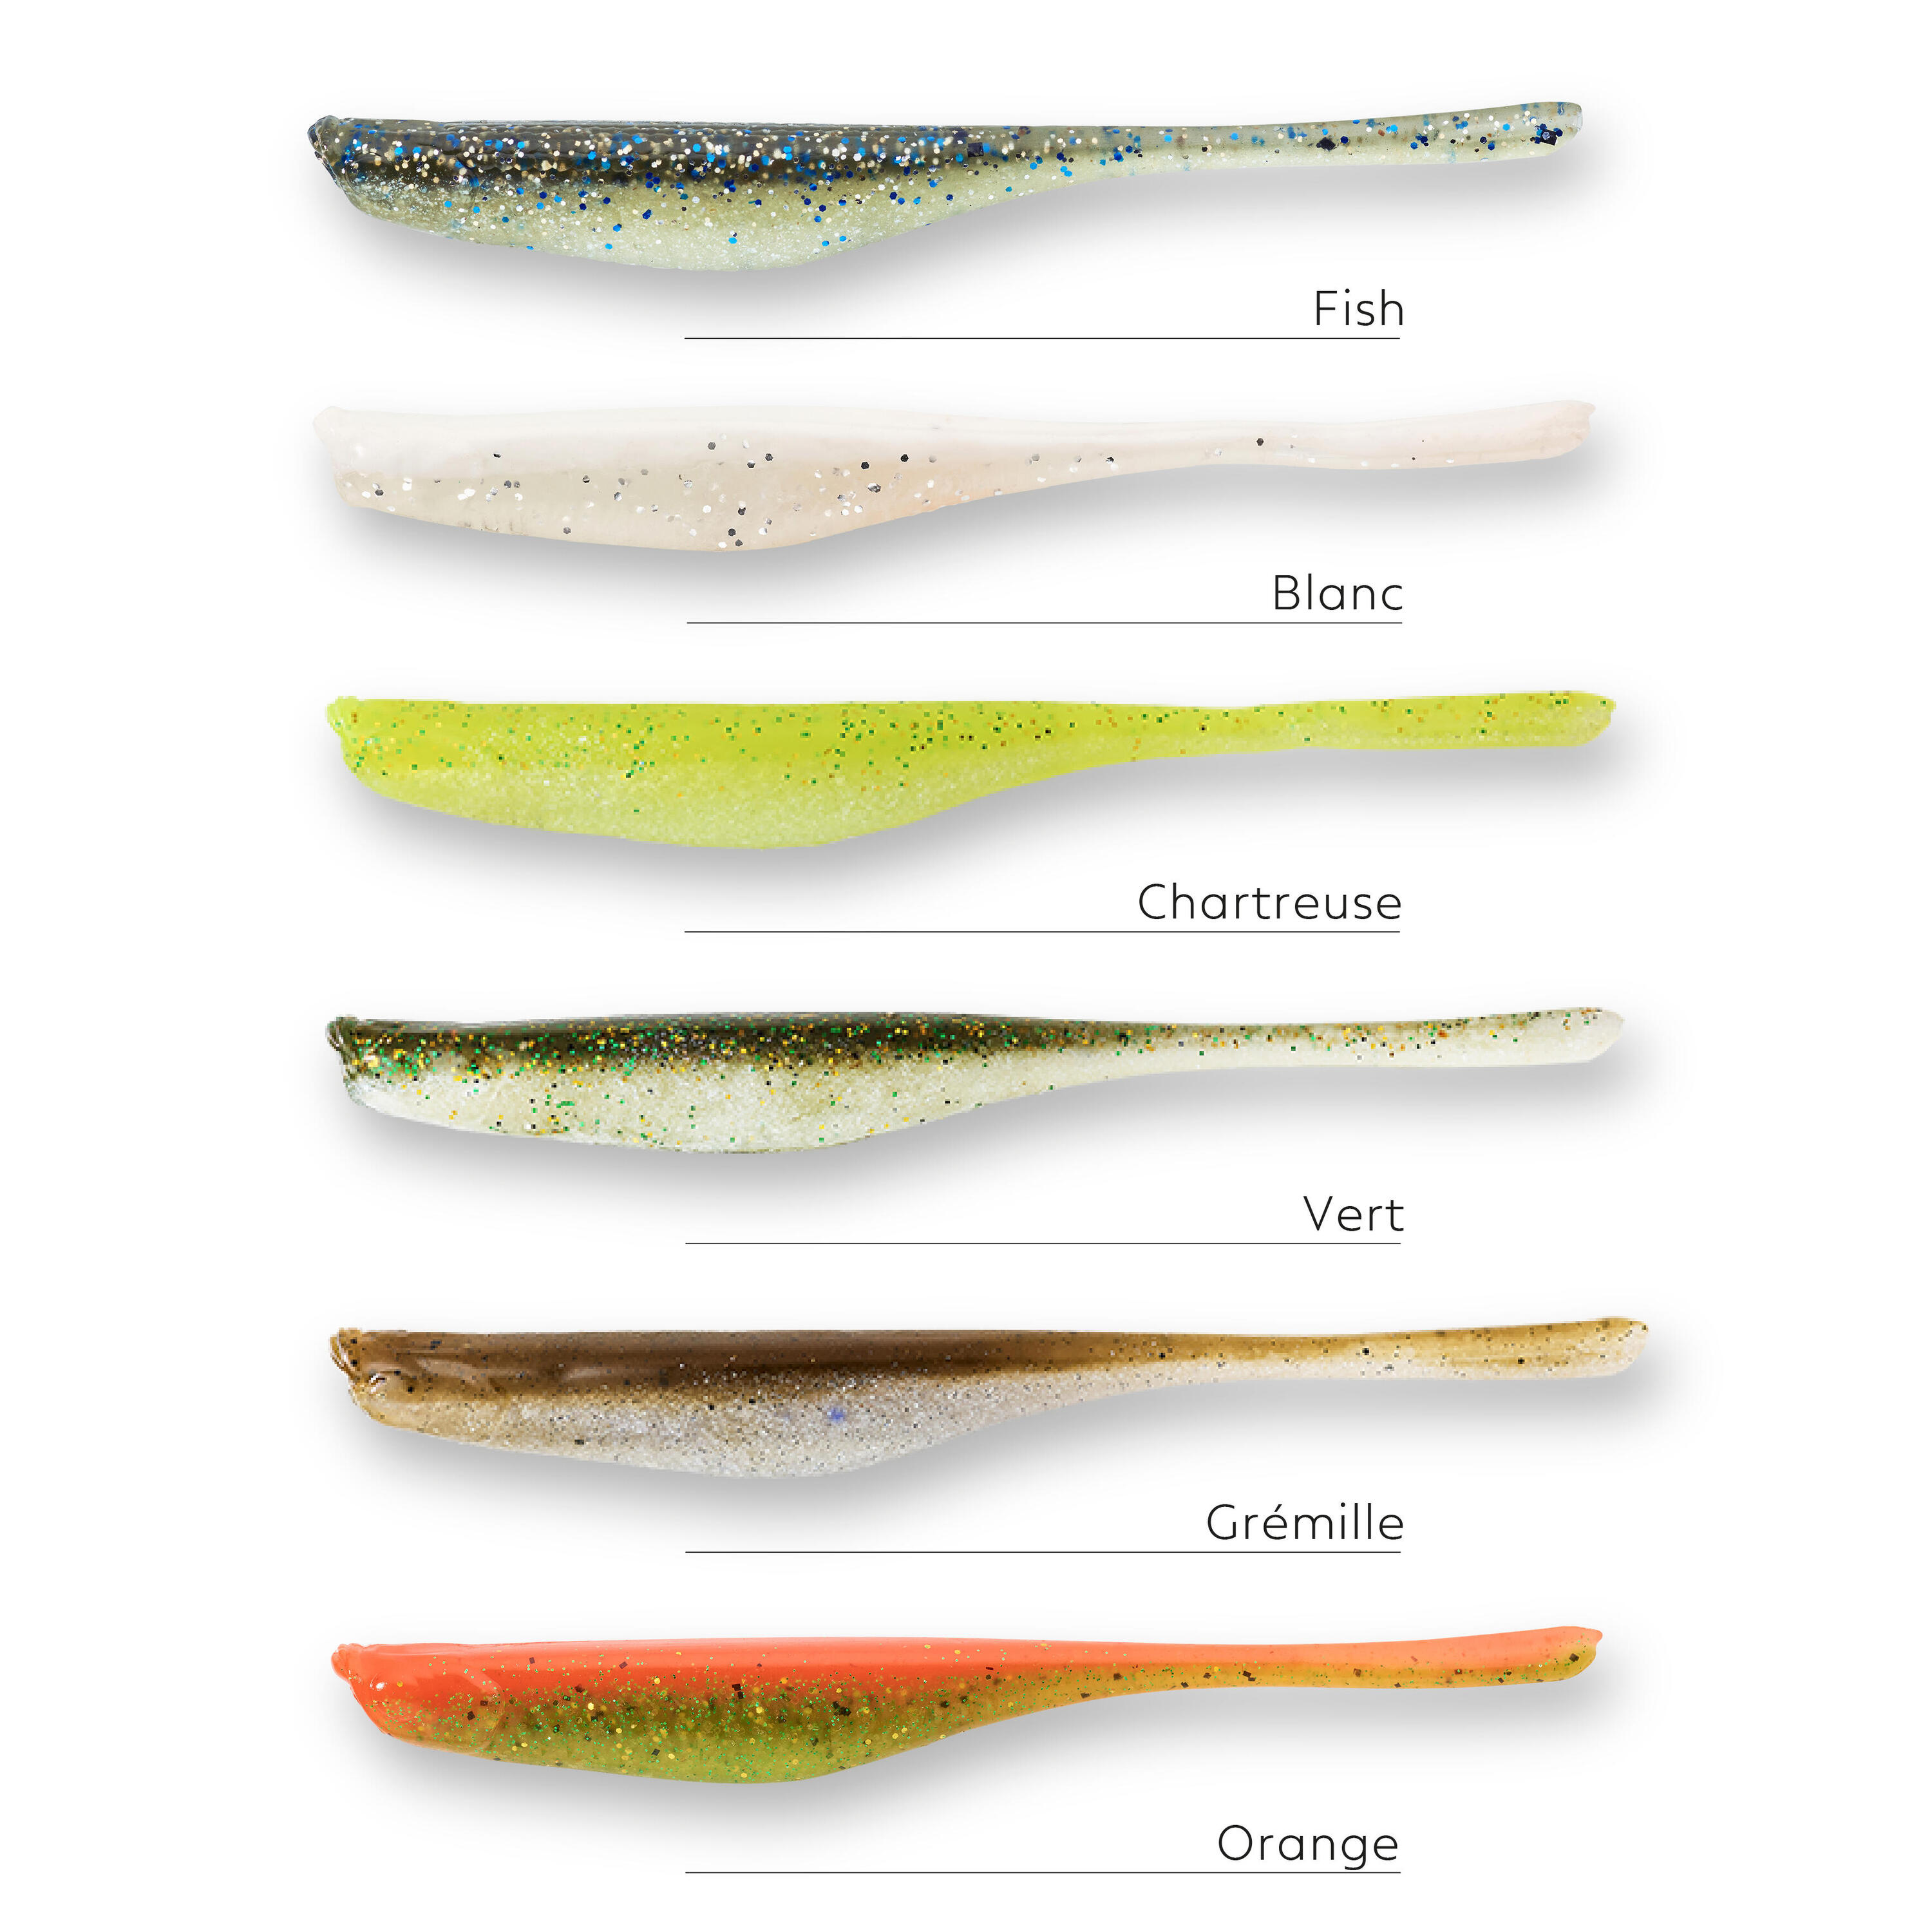 FINESS SOFT LURE WITH ATTRACTANT WXM YUBARI FINSS 100 CHARTREUSE 2/7